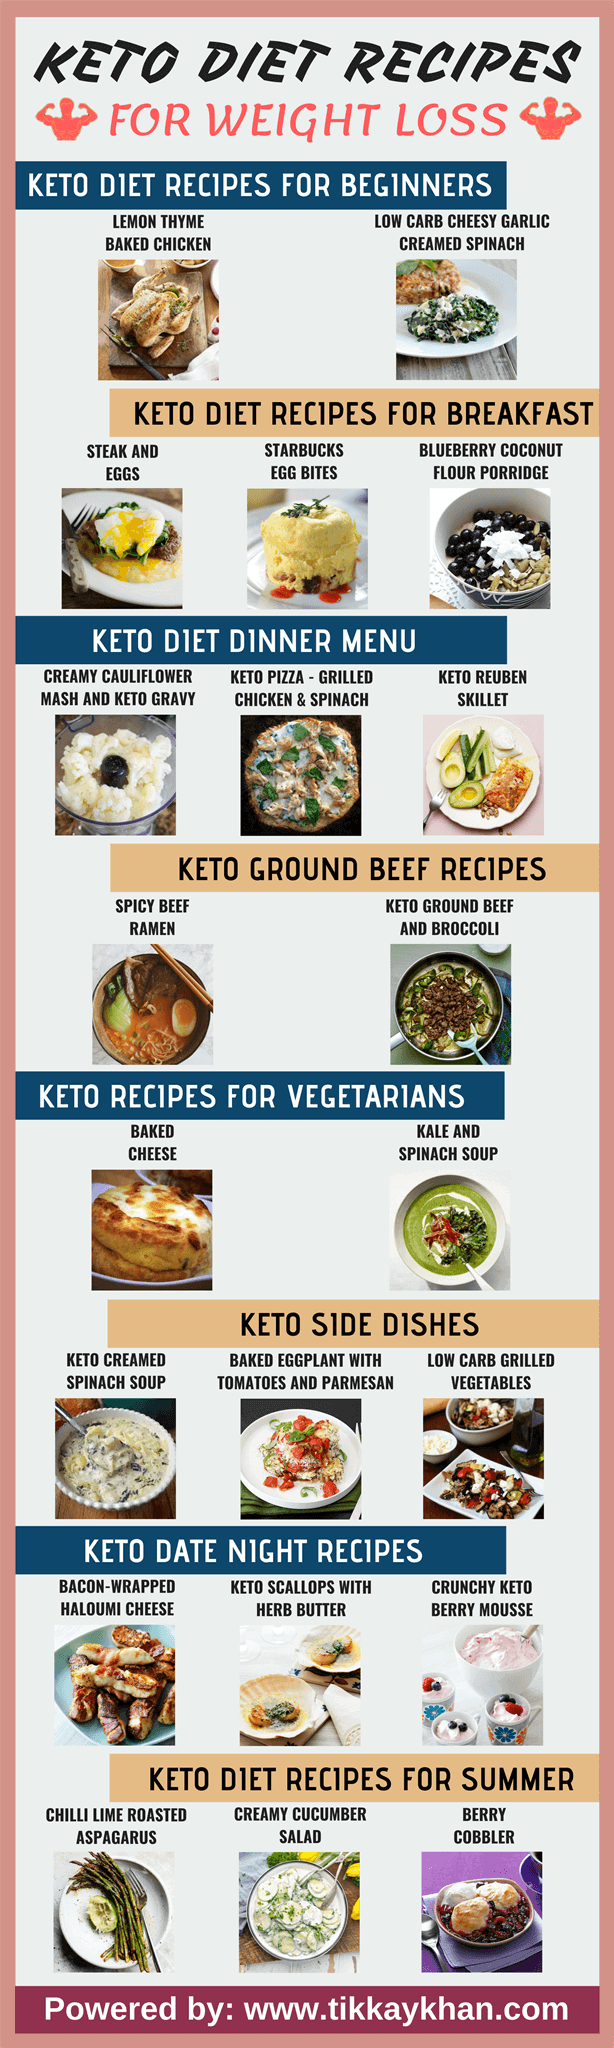 Keto Diet Recipes for Weight Loss